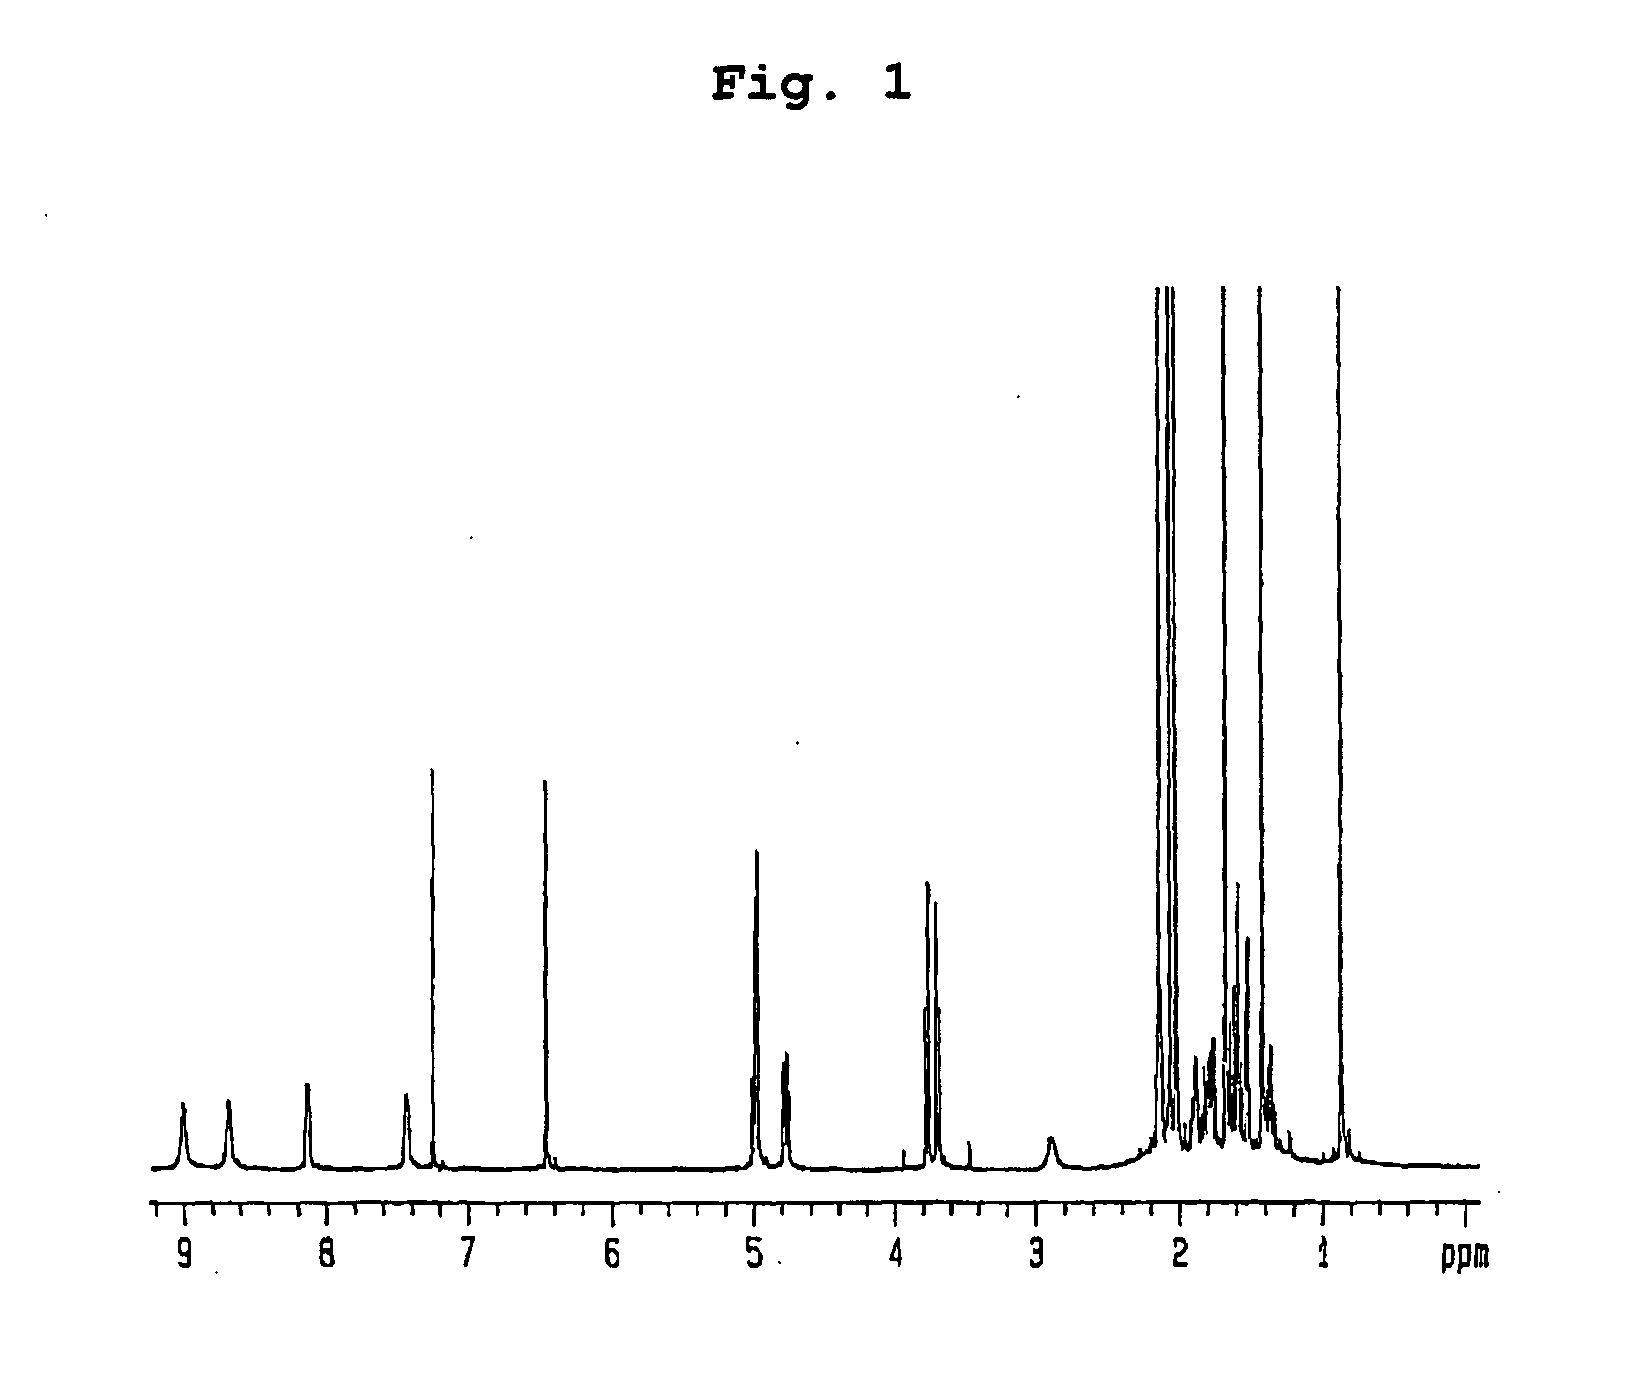 Insecticidal compositions comprising compounds having inhibitory activity versus acyl coa: cholesterol acyltransferase or salts thereof as effective ingredients